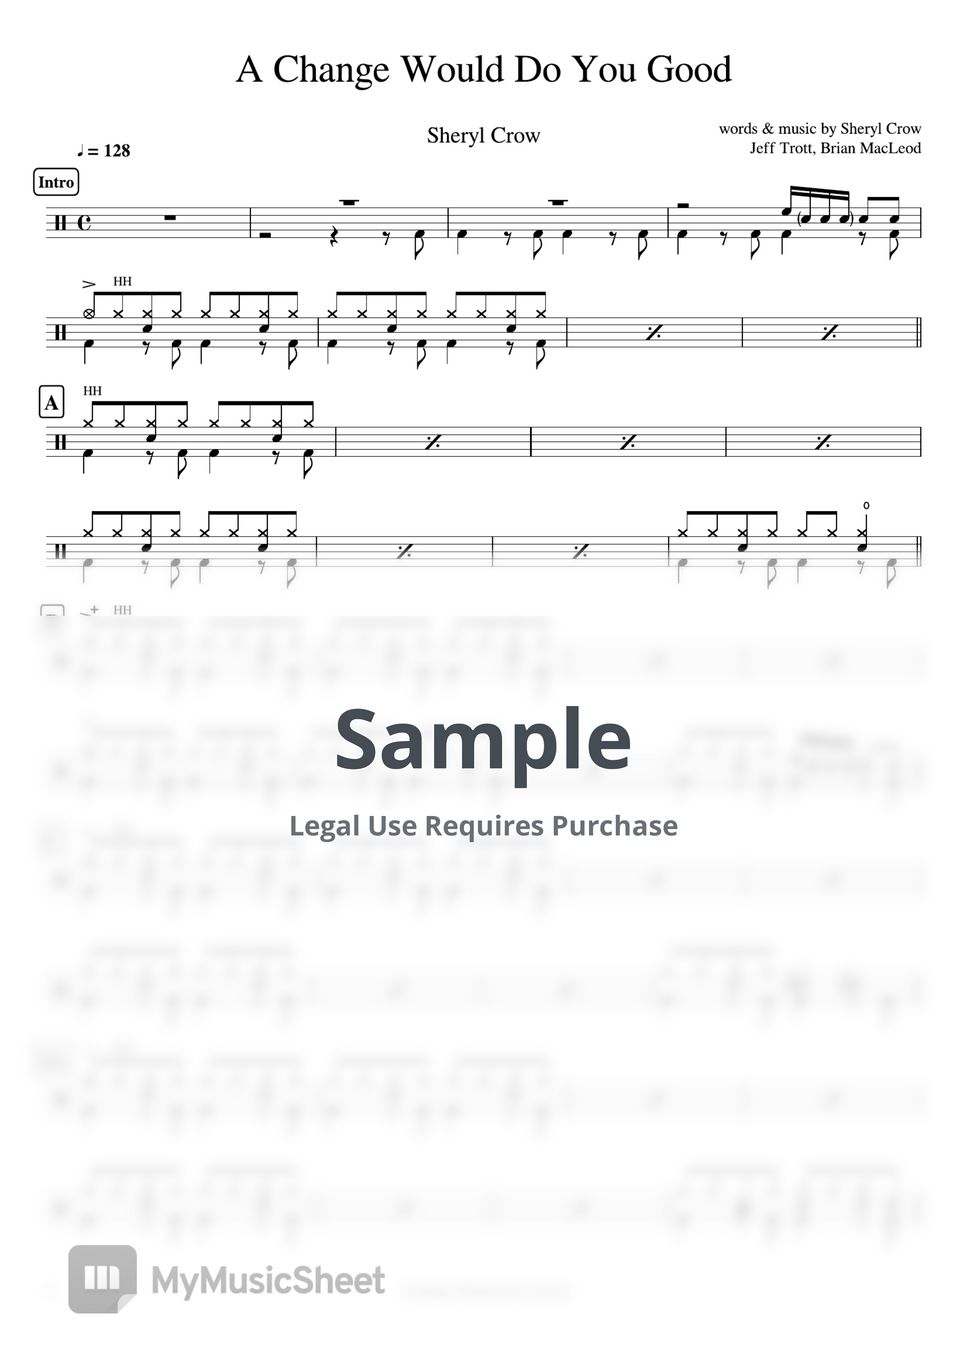 Sheryl Crow - A Change Would Do You Good by Cookai's J-pop Drum sheet music!!!